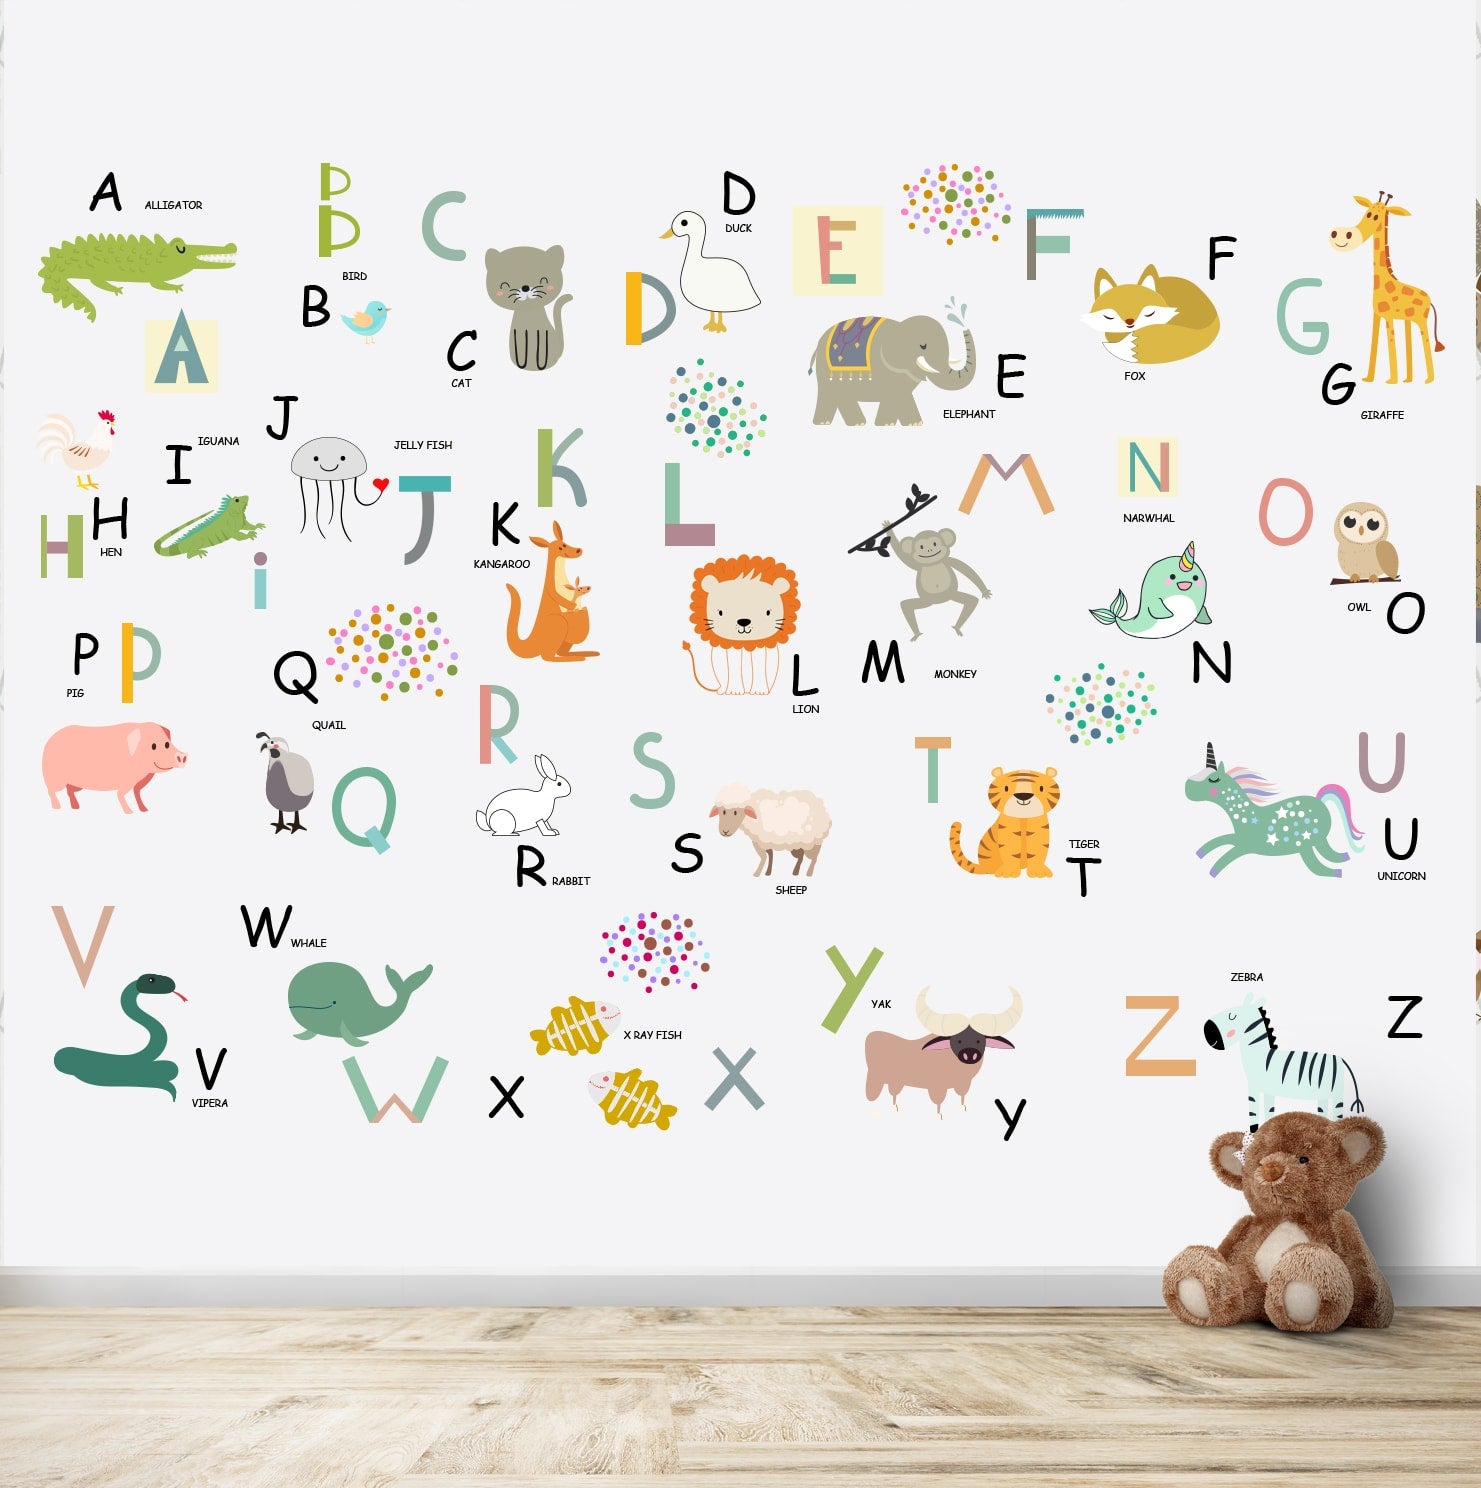 Wallpaper for New Born Kid, Alphabets and Animals Design Wallpaper, Customised